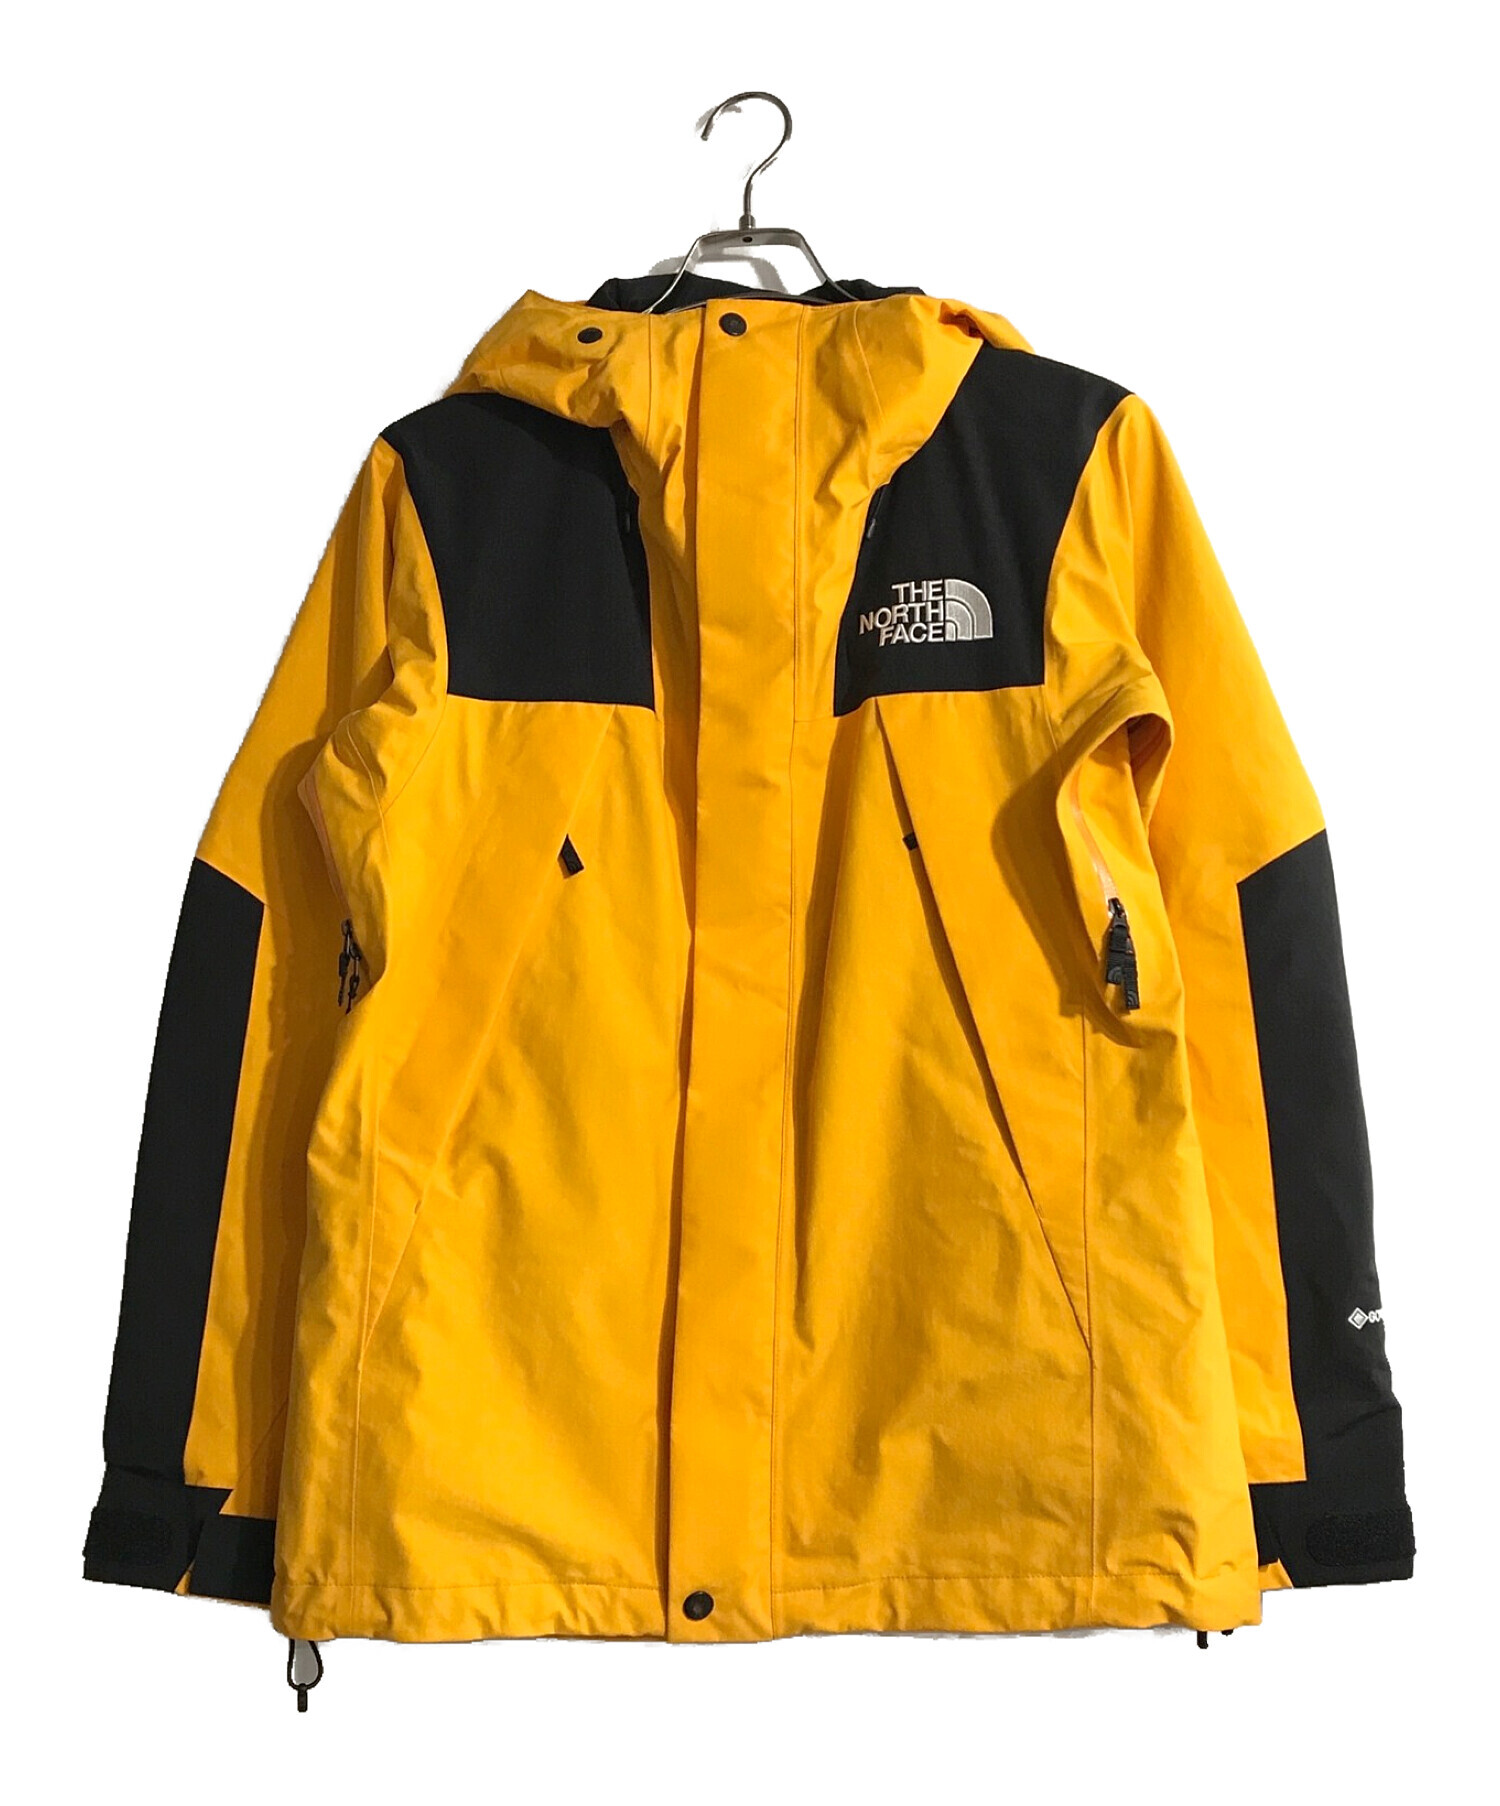 THE NORTH FACE  イエローコート